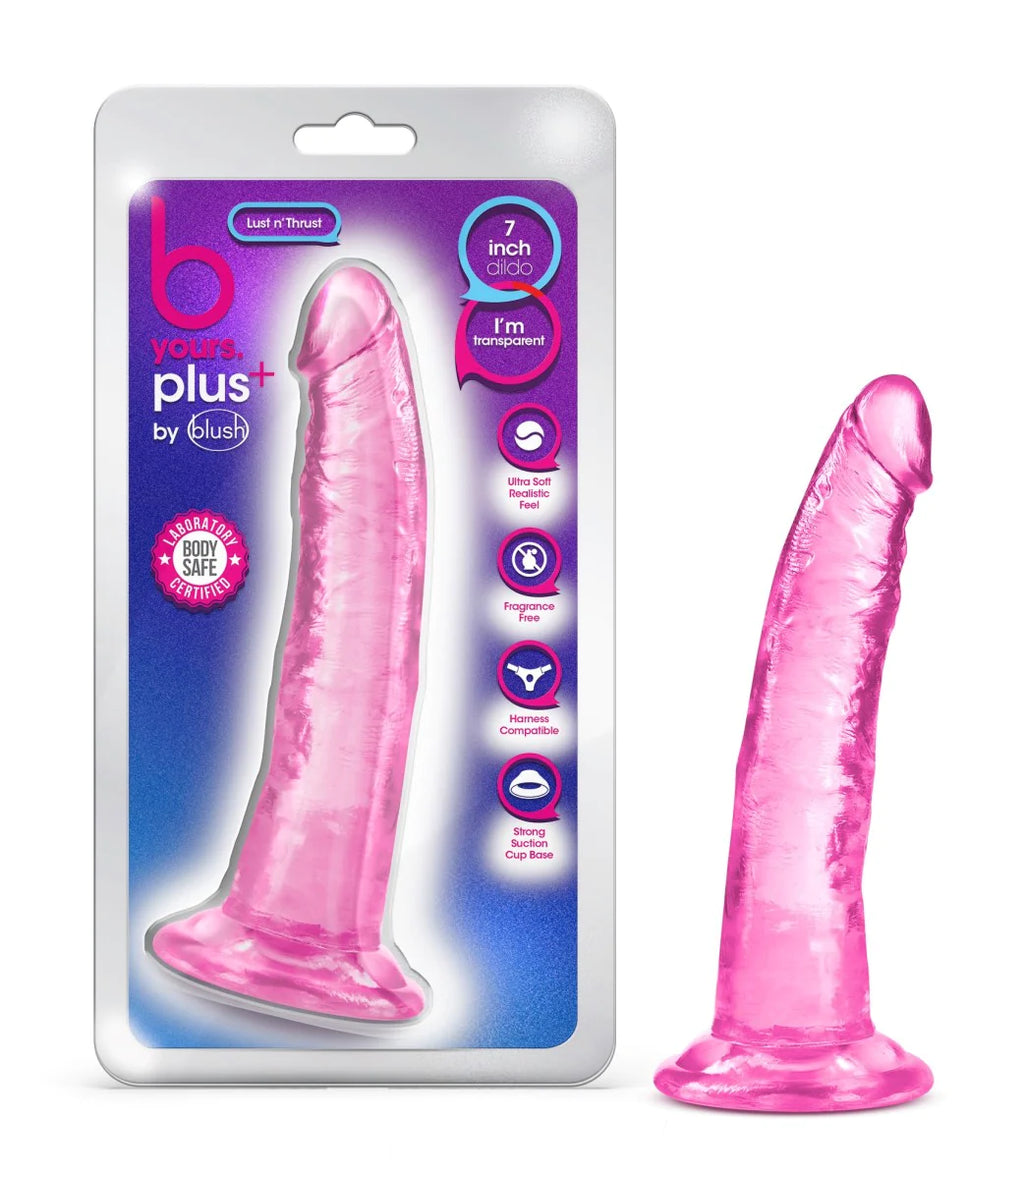 B Yours Plus Lust N’ Thrust Realistic Pink 7.5-Inch Long Dildo